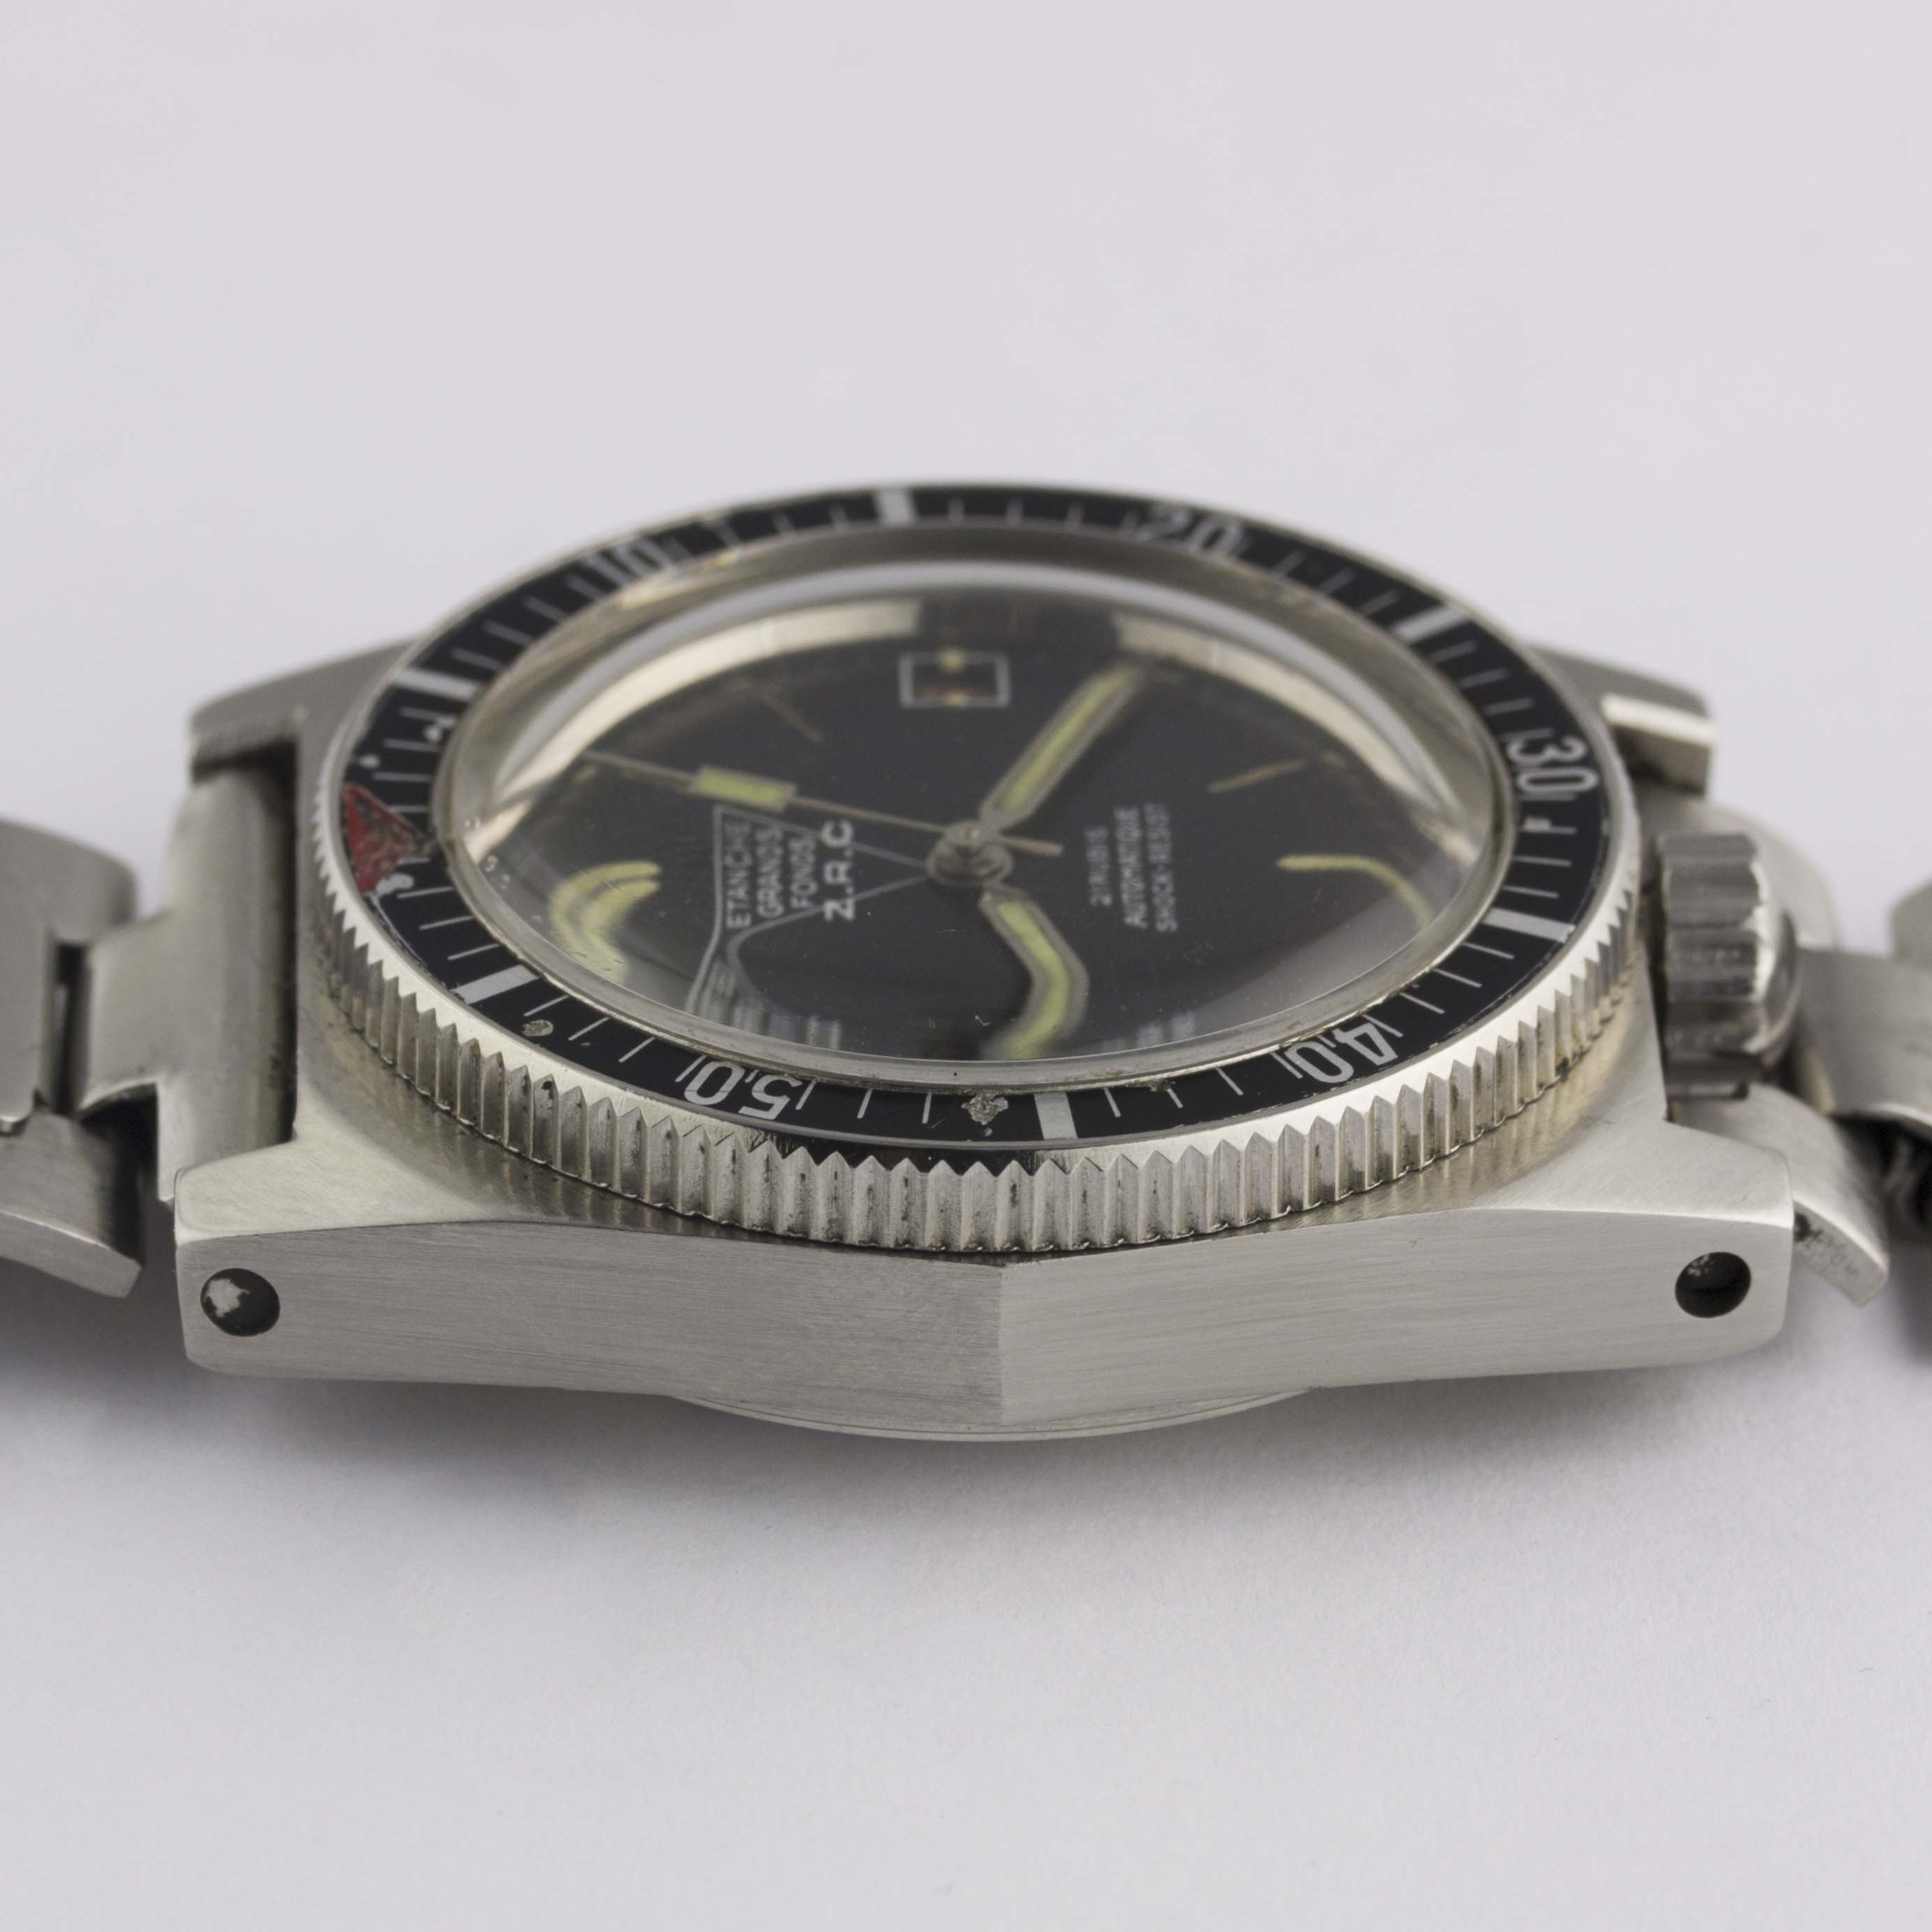 A VERY RARE GENTLEMAN'S STAINLESS STEEL Z.R.C. ETANCHE GRANDS FONDS 300M "SERIES III" AUTOMATIC - Image 11 of 11